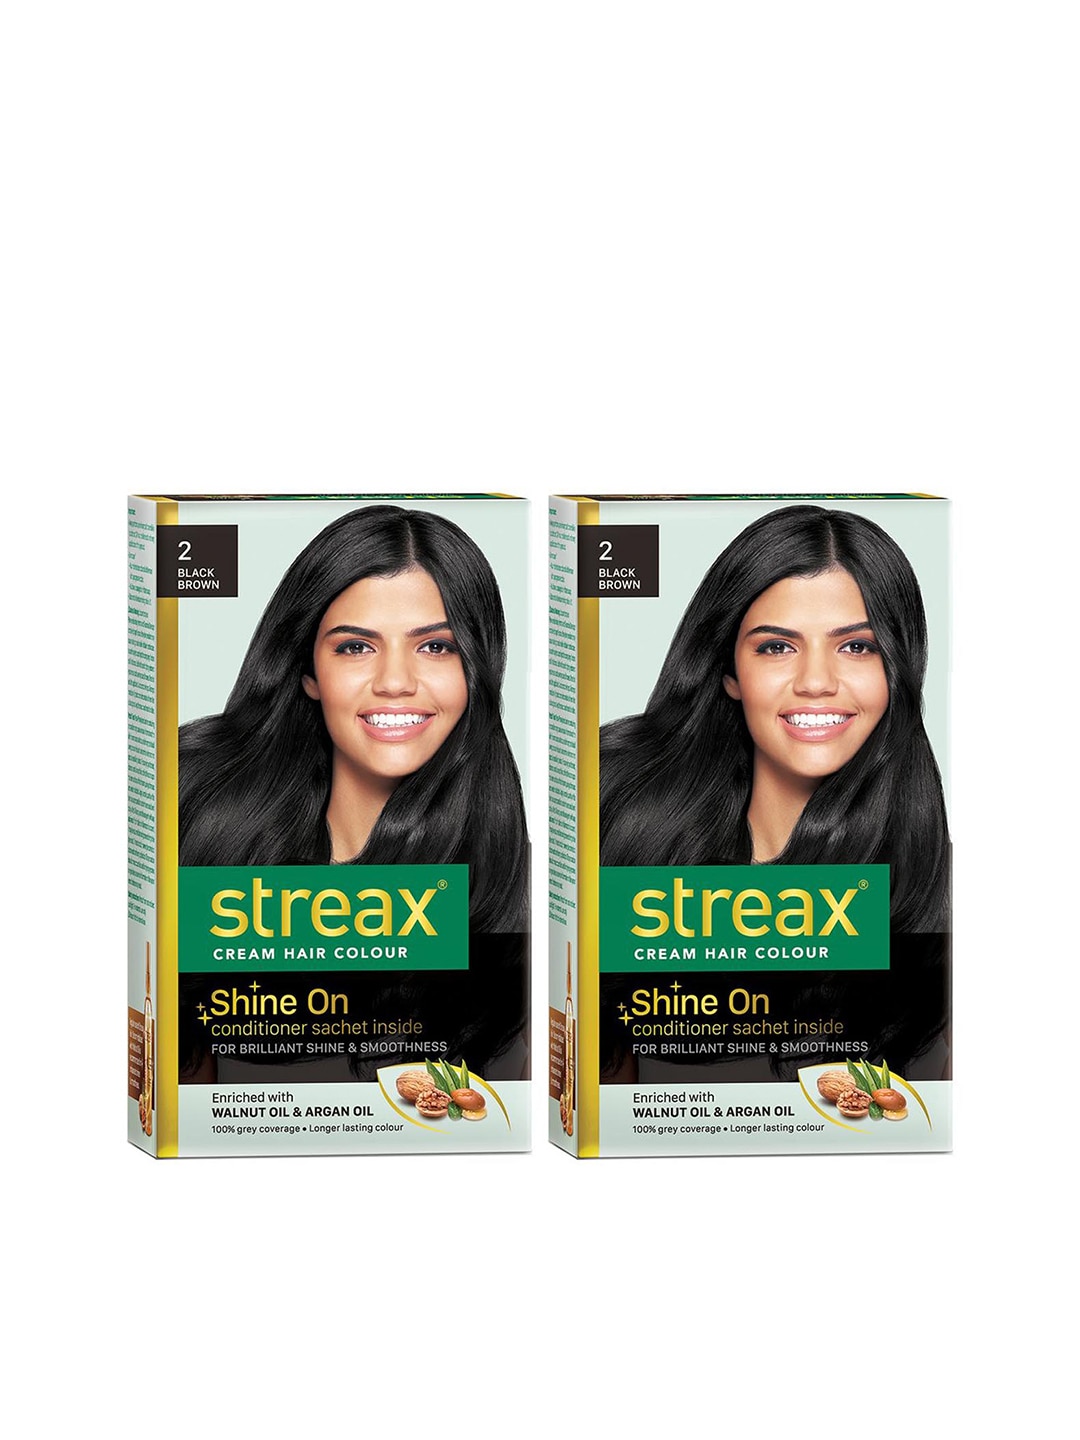 Streax Set of 2 Cream Hair Colour - 2 Black Brown 120 ml Each Price in  India, Full Specifications & Offers 